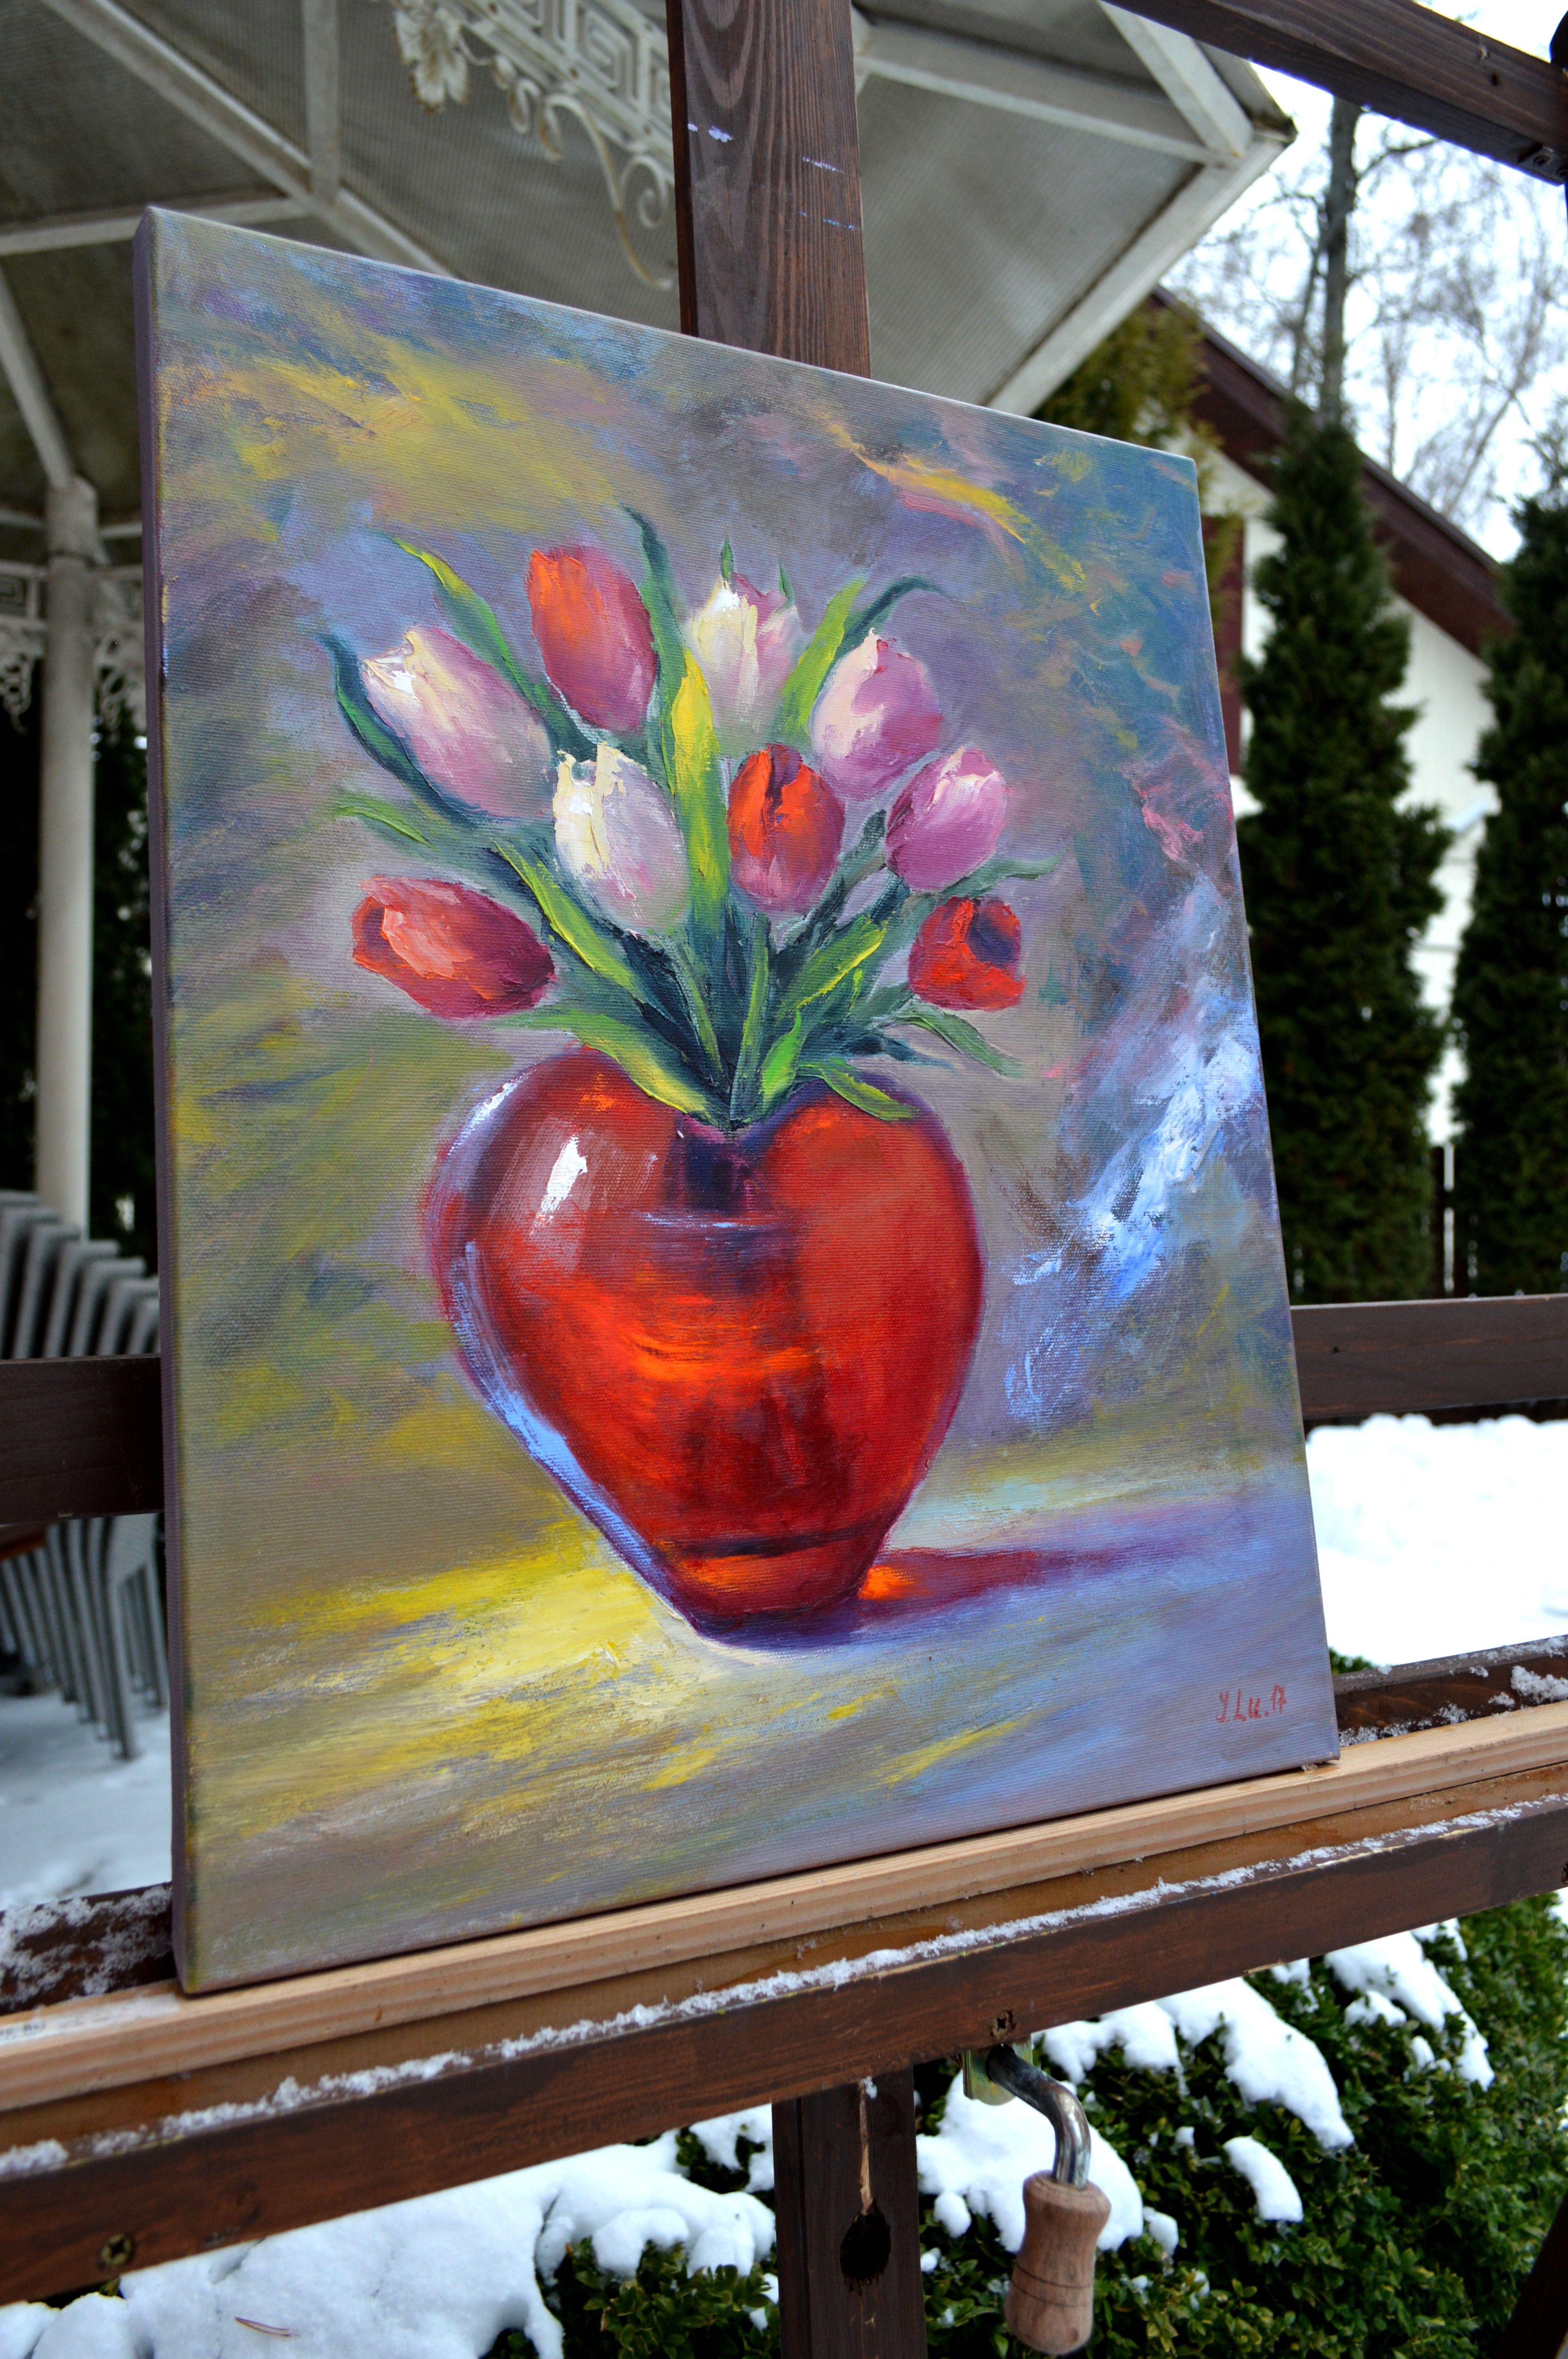 In this fervent oil painting, I've channeled the vibrancy of passion and the tenderness of affection through a bouquet of luscious tulips cradled in a gleaming red vase. The expressive strokes and vivid hues encapsulate a moment of beauty that